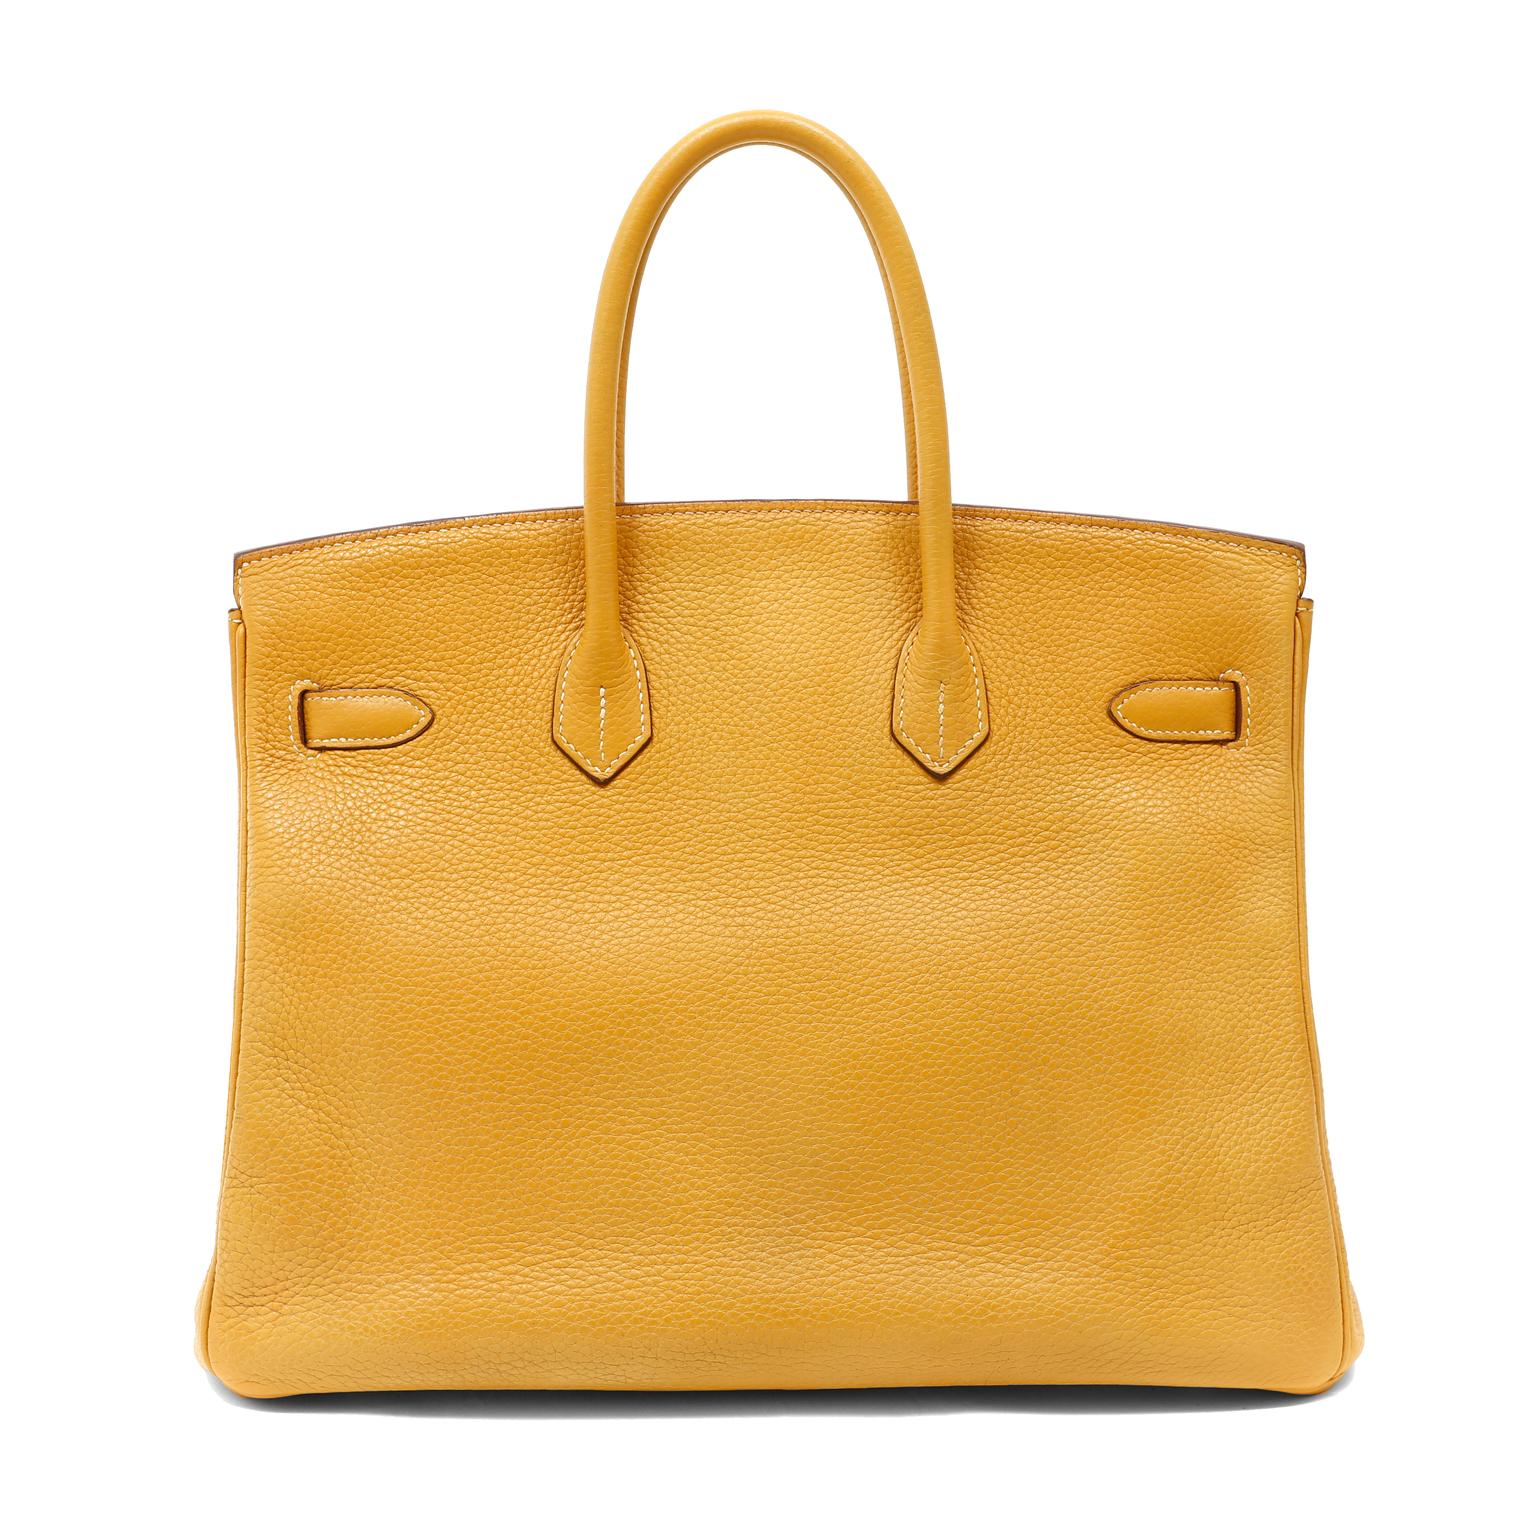 This authentic Hermès Curry yellow Clemence 35cm Birkin is in pristine condition with the protective plastic on the hardware. Hermès bags are considered the ultimate luxury item the world over.  Hand stitched by skilled craftsmen, wait lists of a